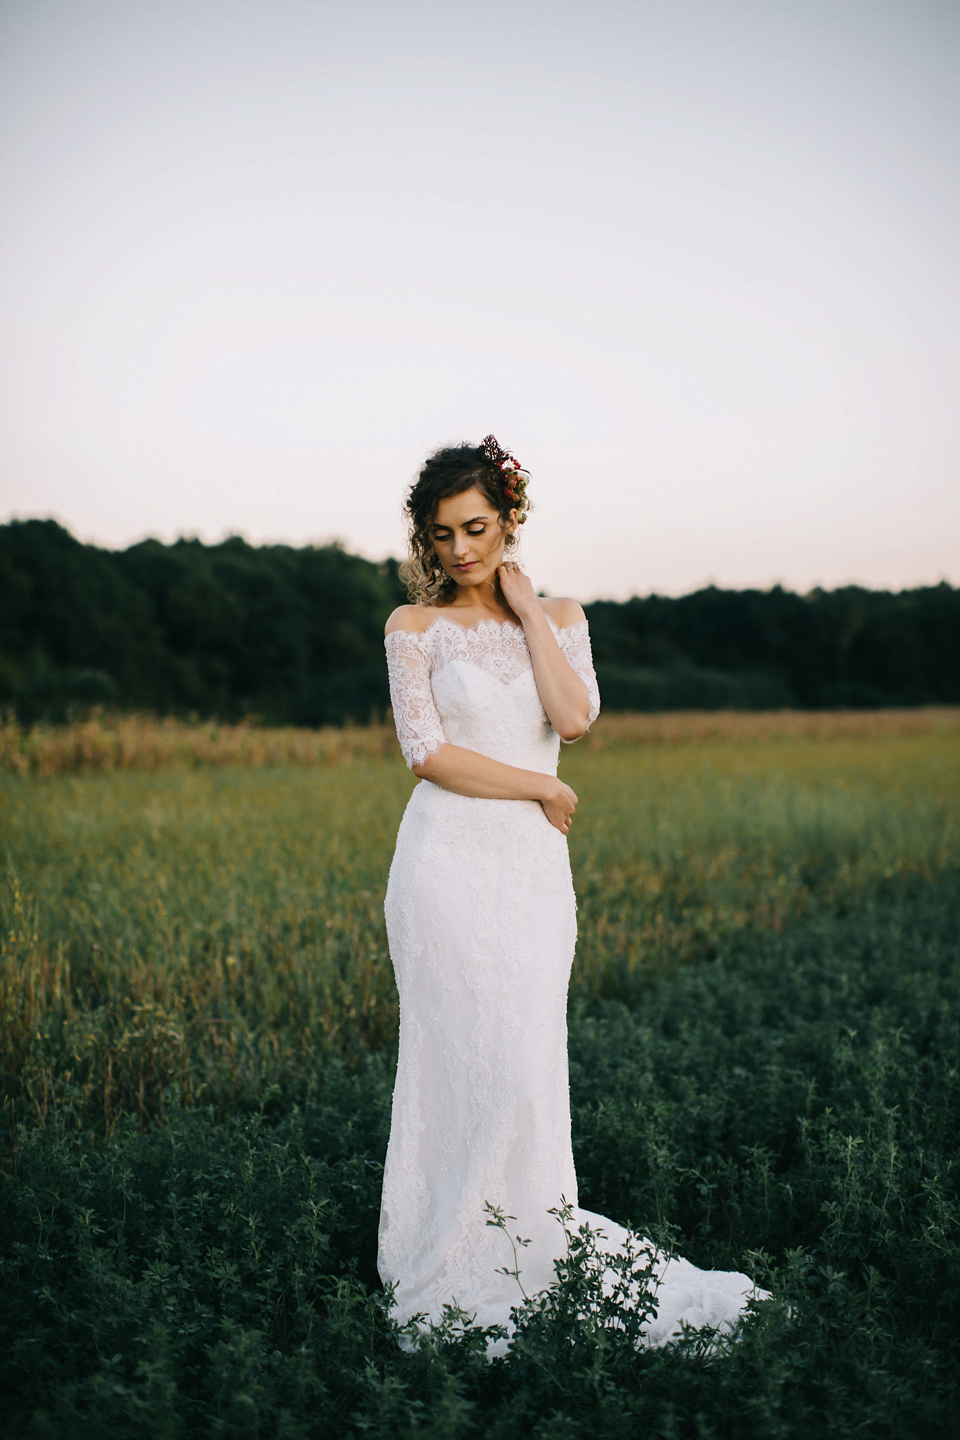 Laura wore a gown by Otilia Brailoiu for her Autumn wedding in the Romanian countryside. Images by Green Antlers Photography.